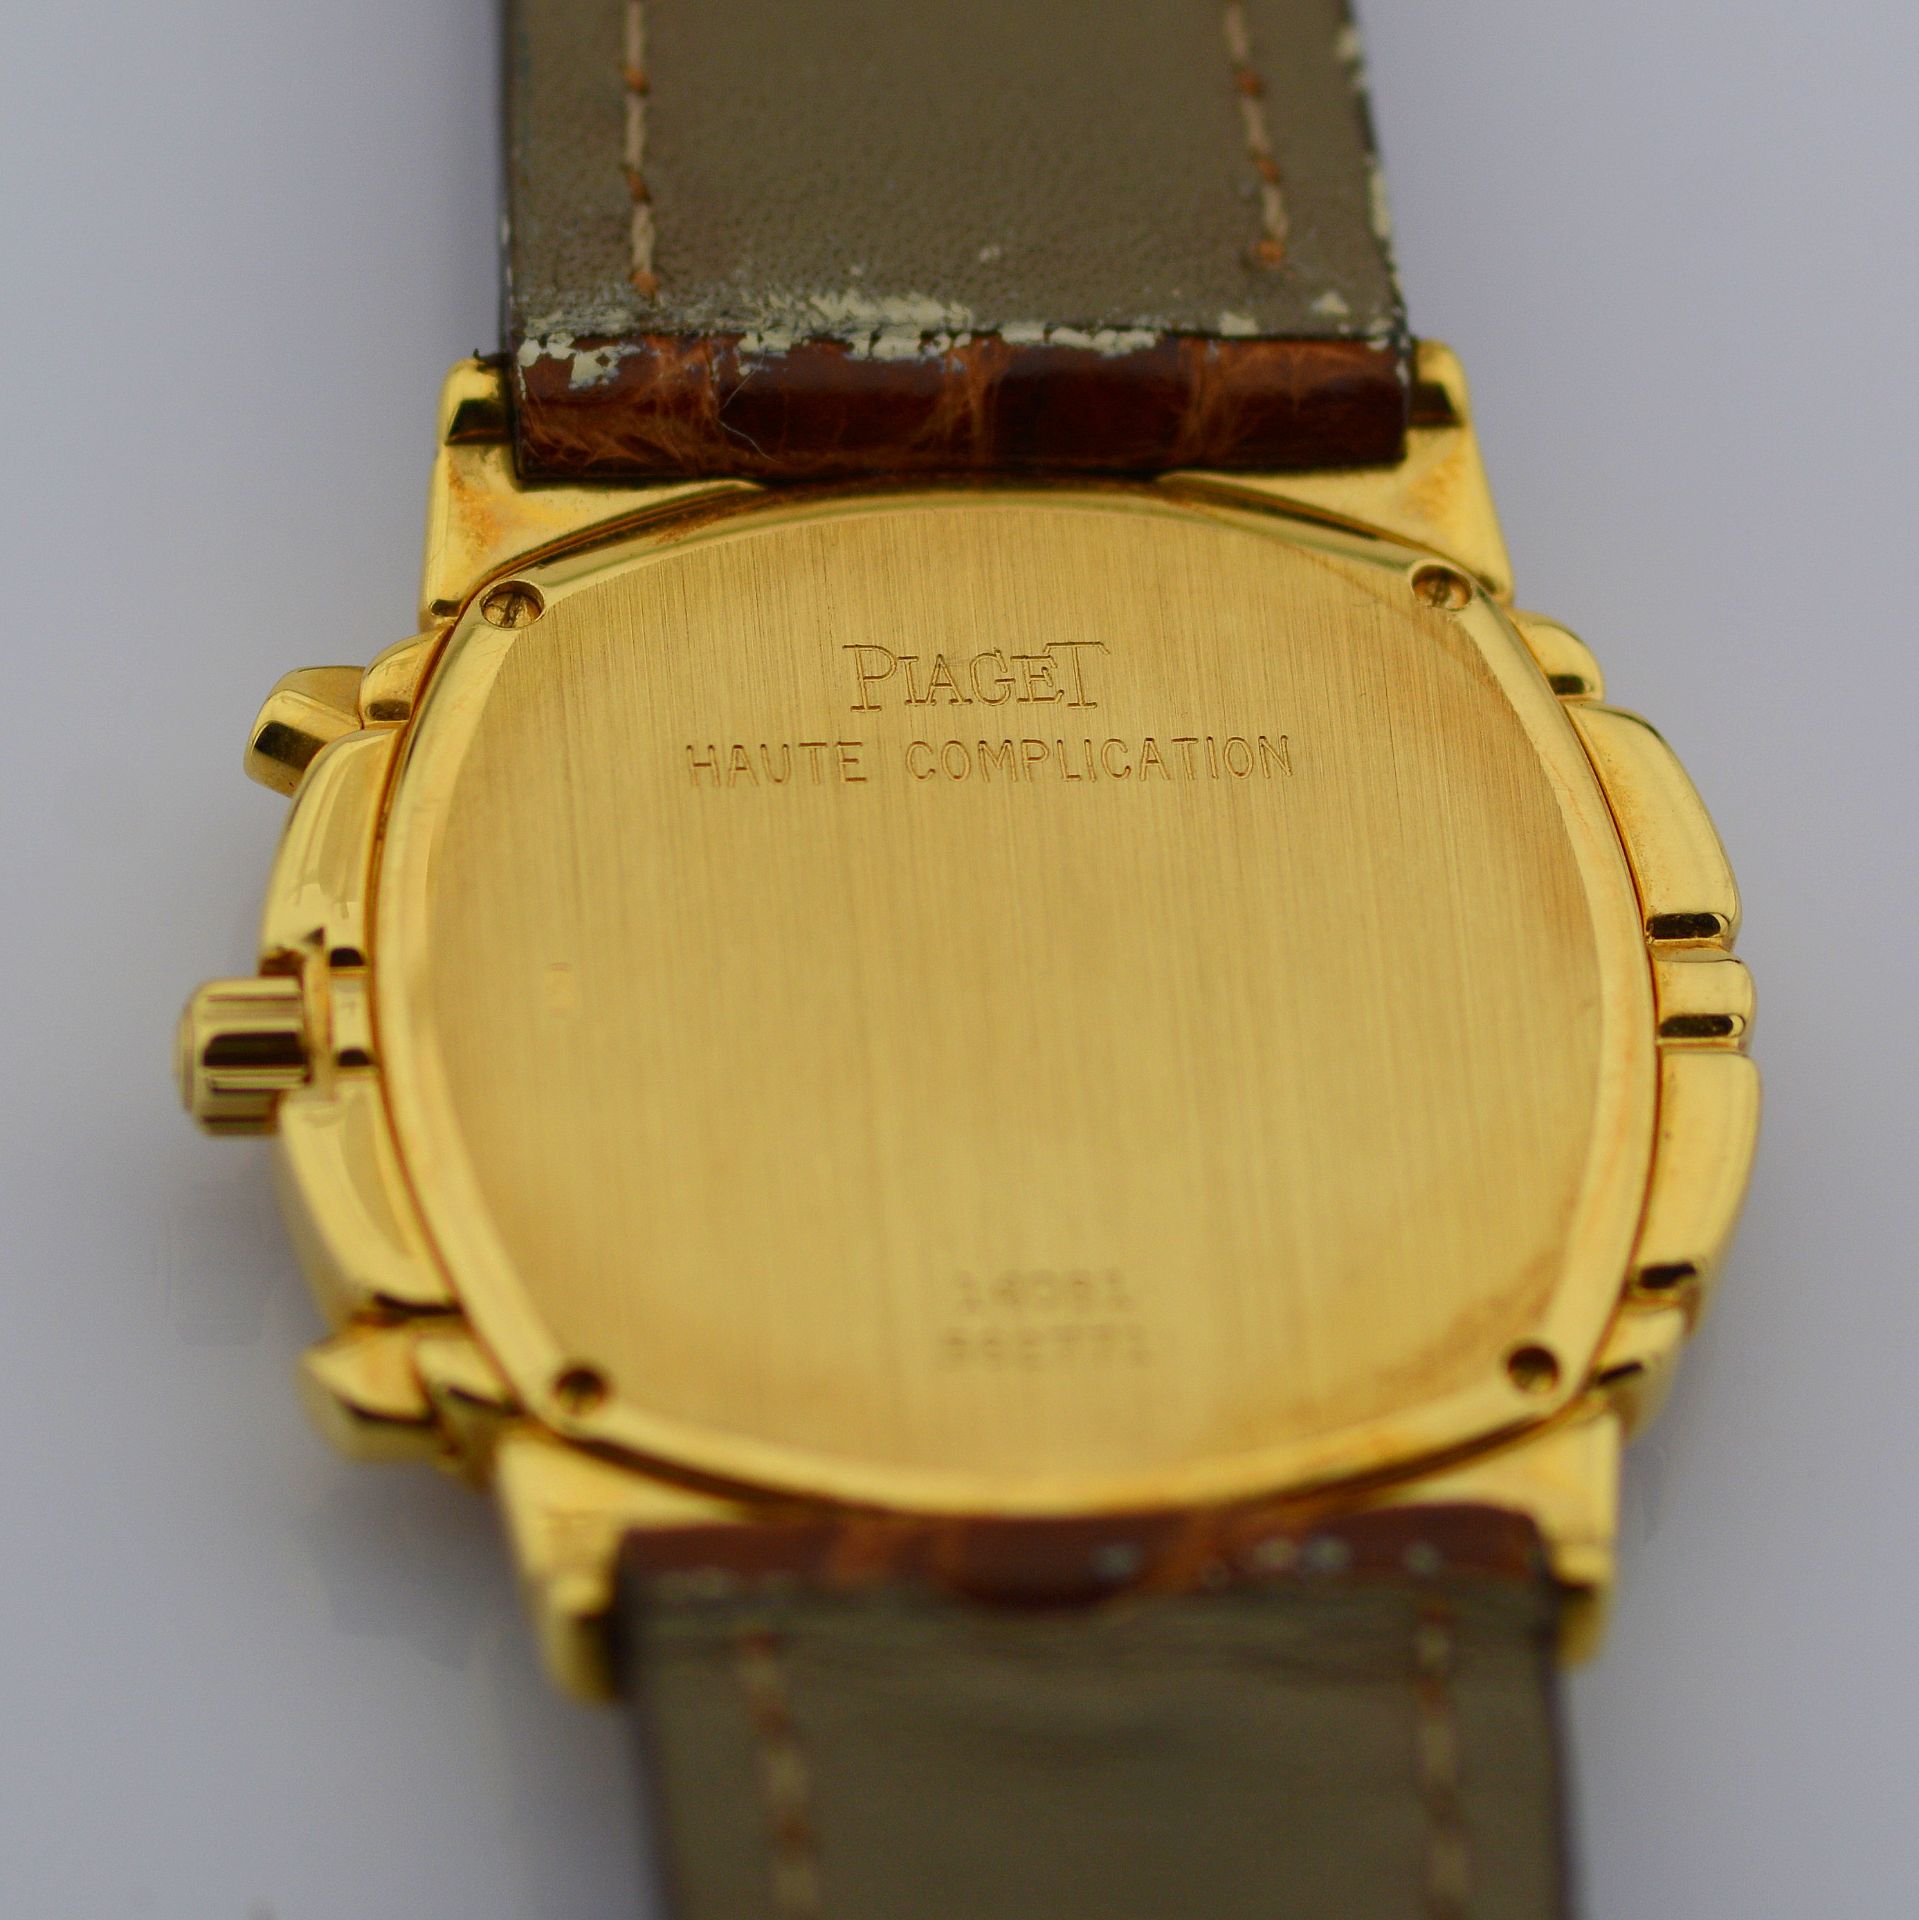 Piaget / Tanagra Chronograph - Lady's Yellow gold Wrist Watch - Image 3 of 15